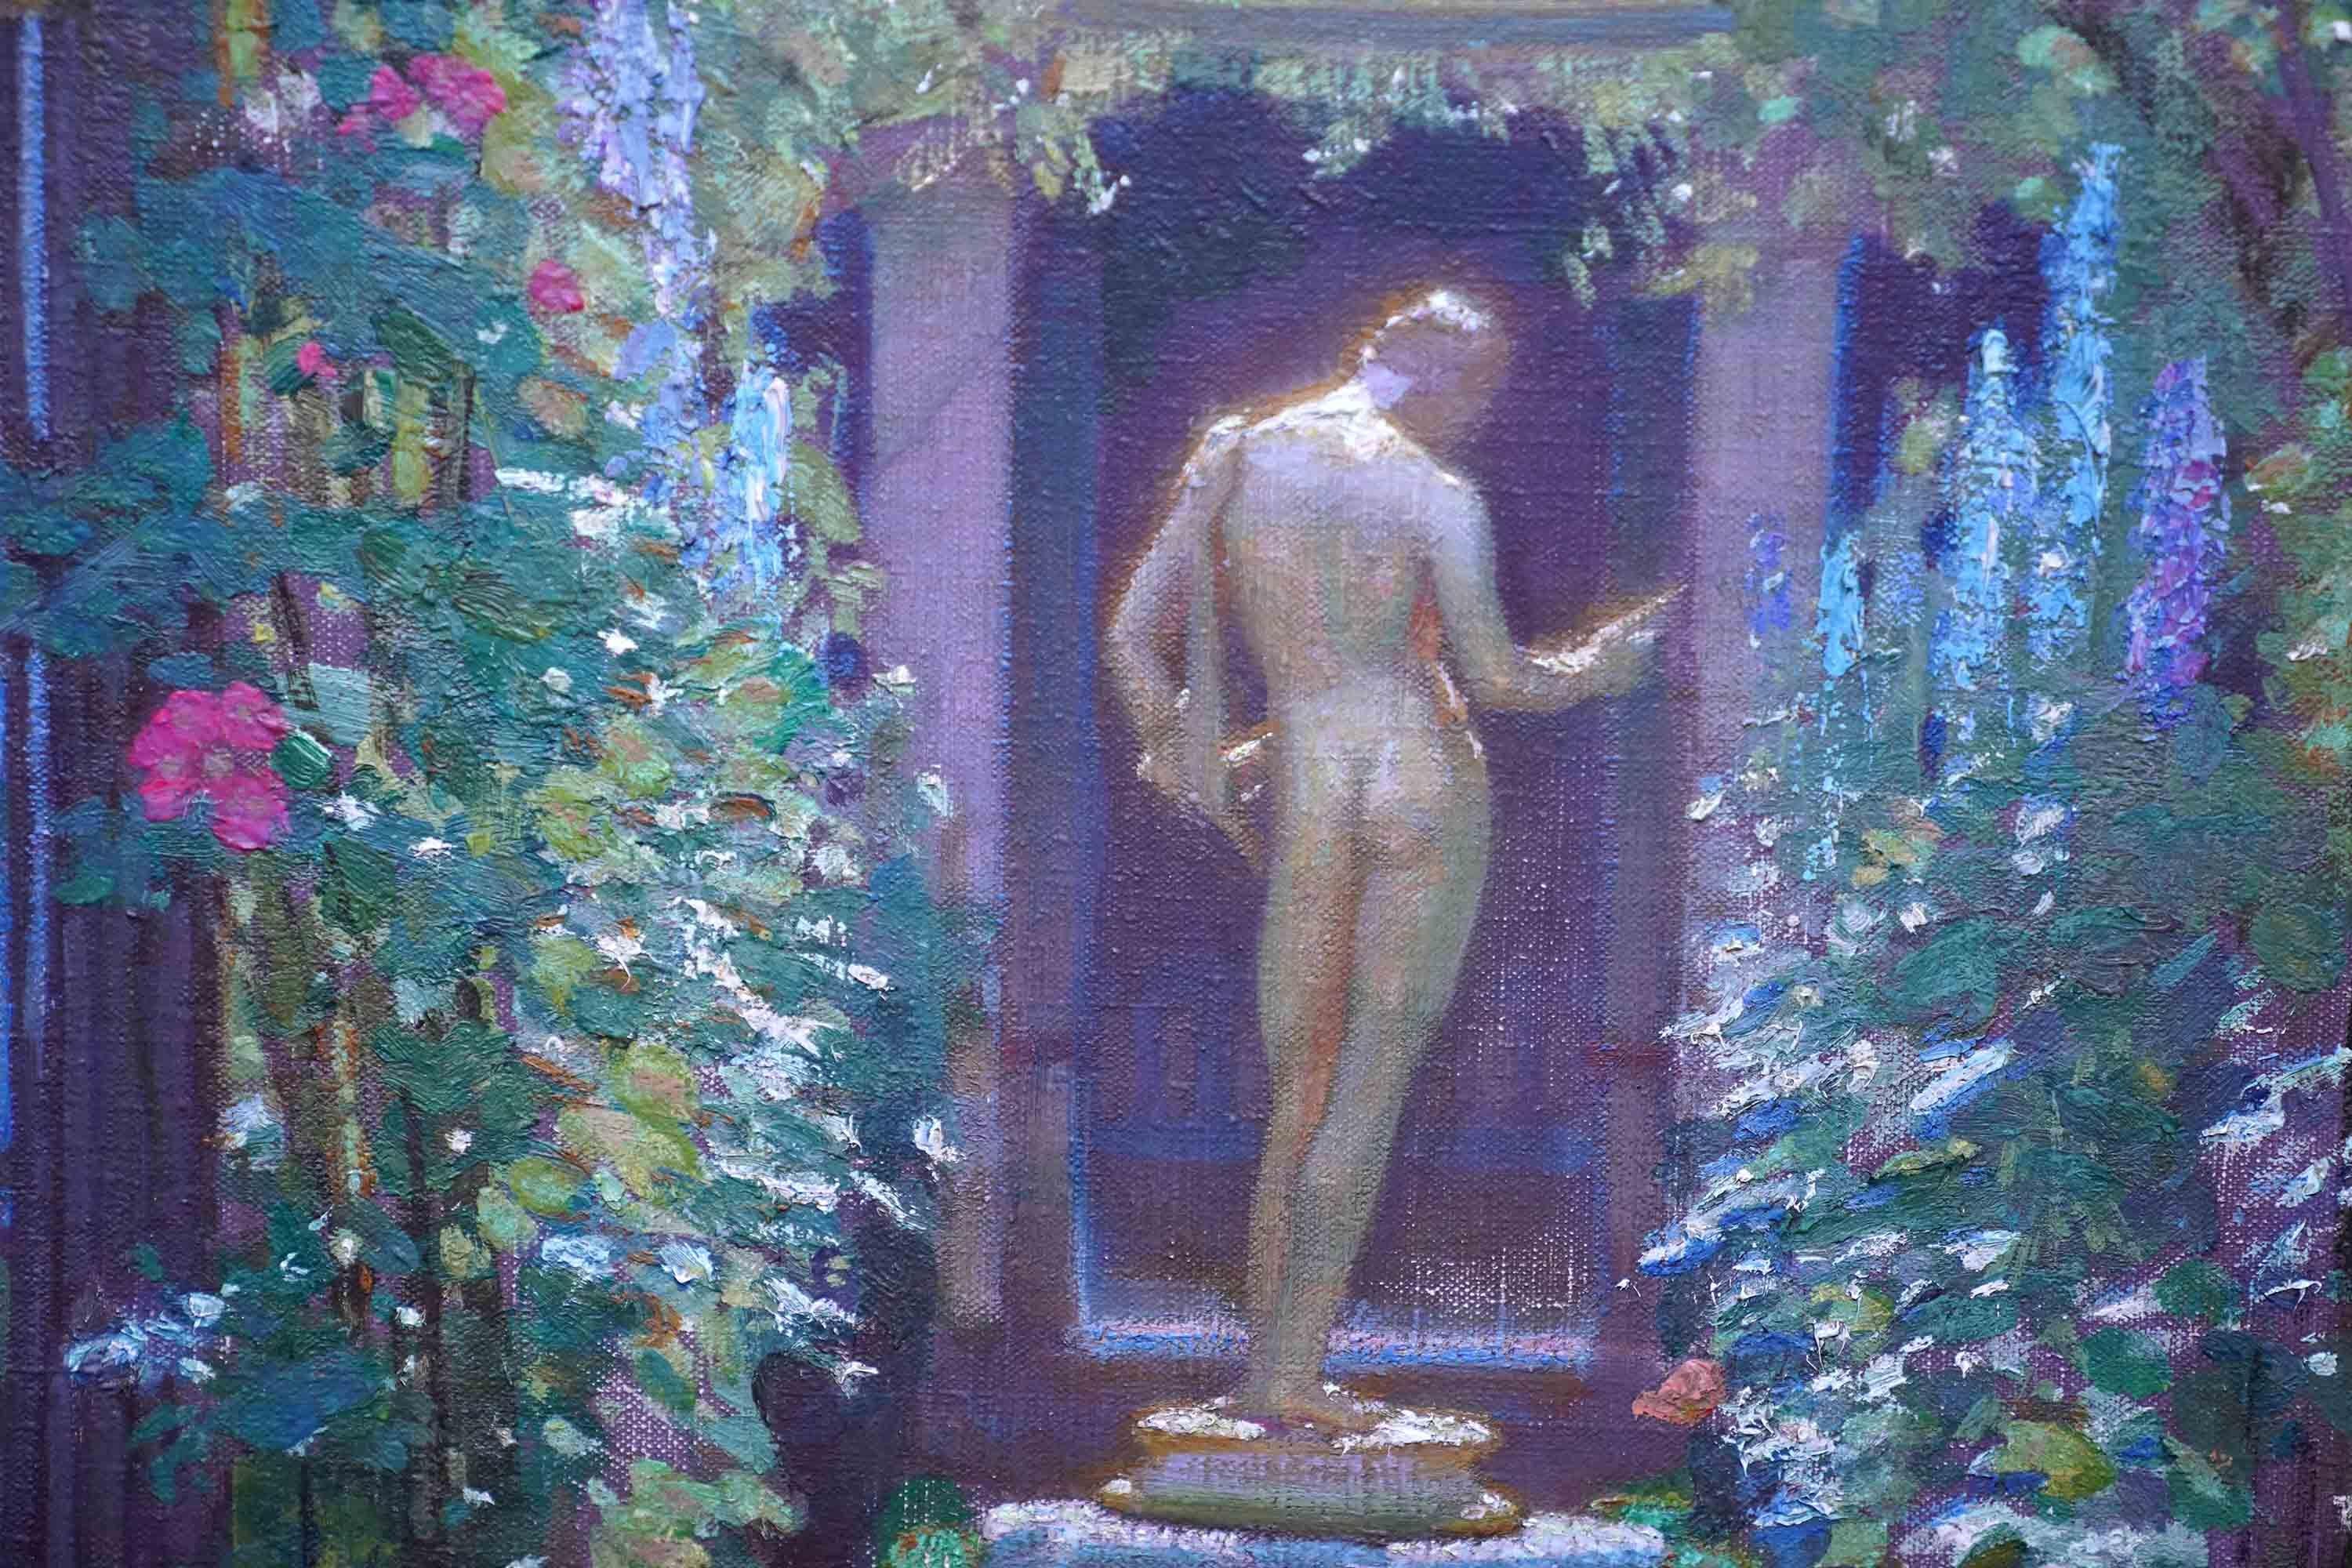 Garden with Classical Statue - British 1930's art gardenscape oil painting 1